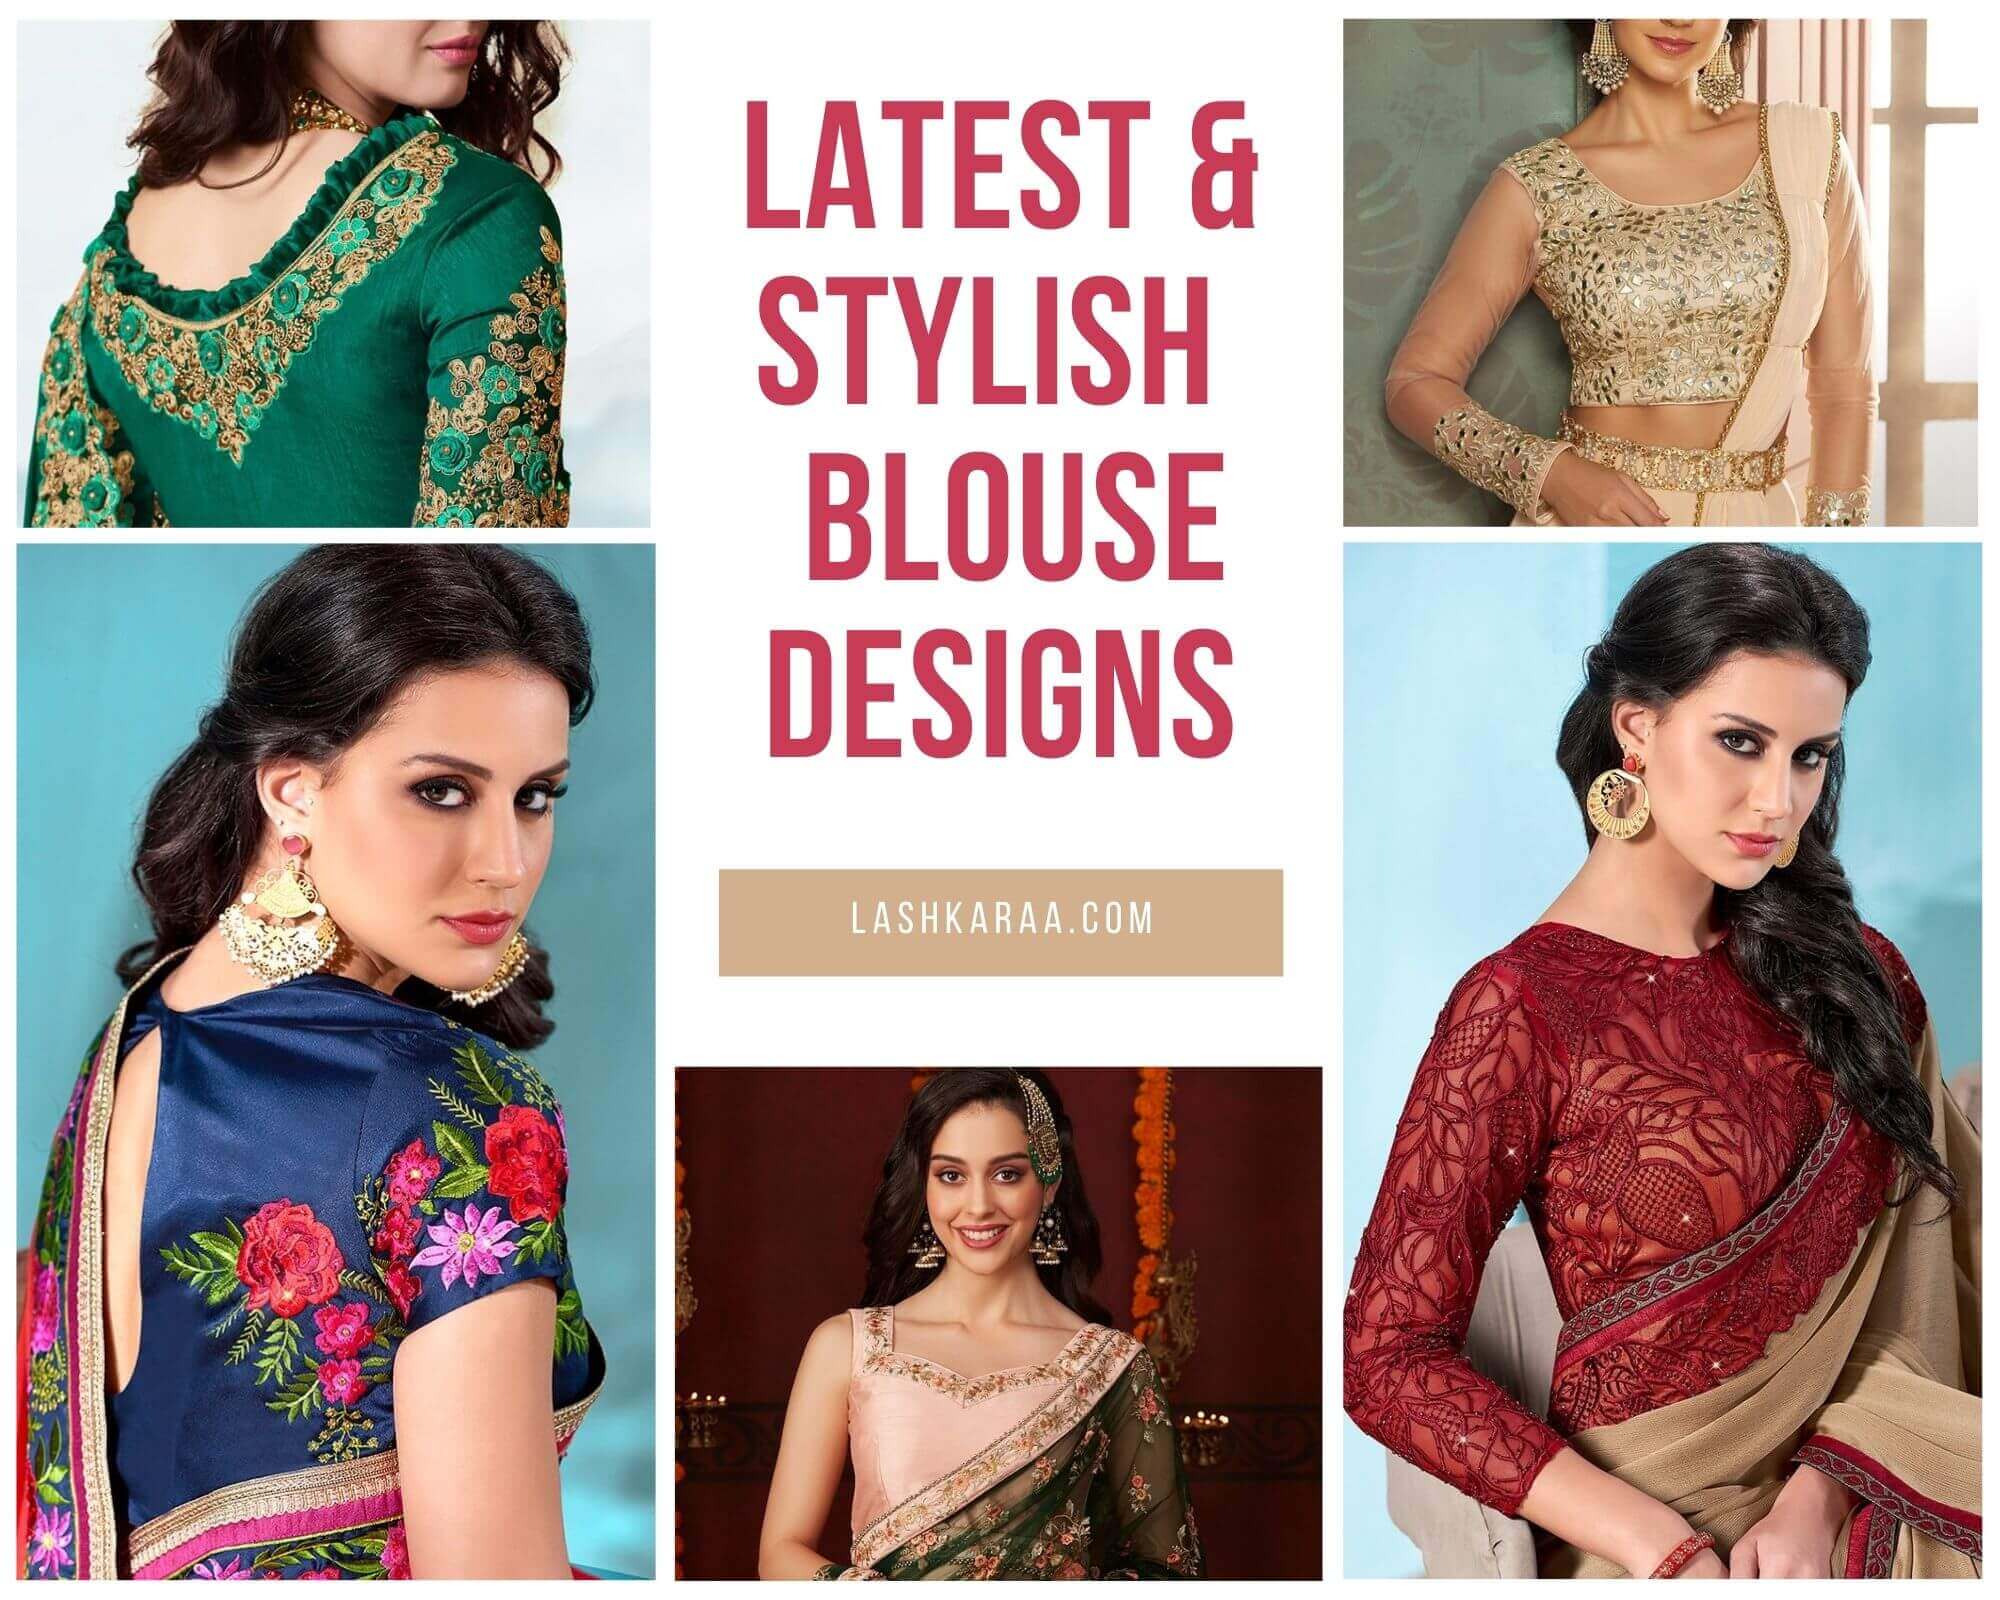 Stunning Silver Colour Blouse Designs for Stylish Look, Designer Silver  Blouses